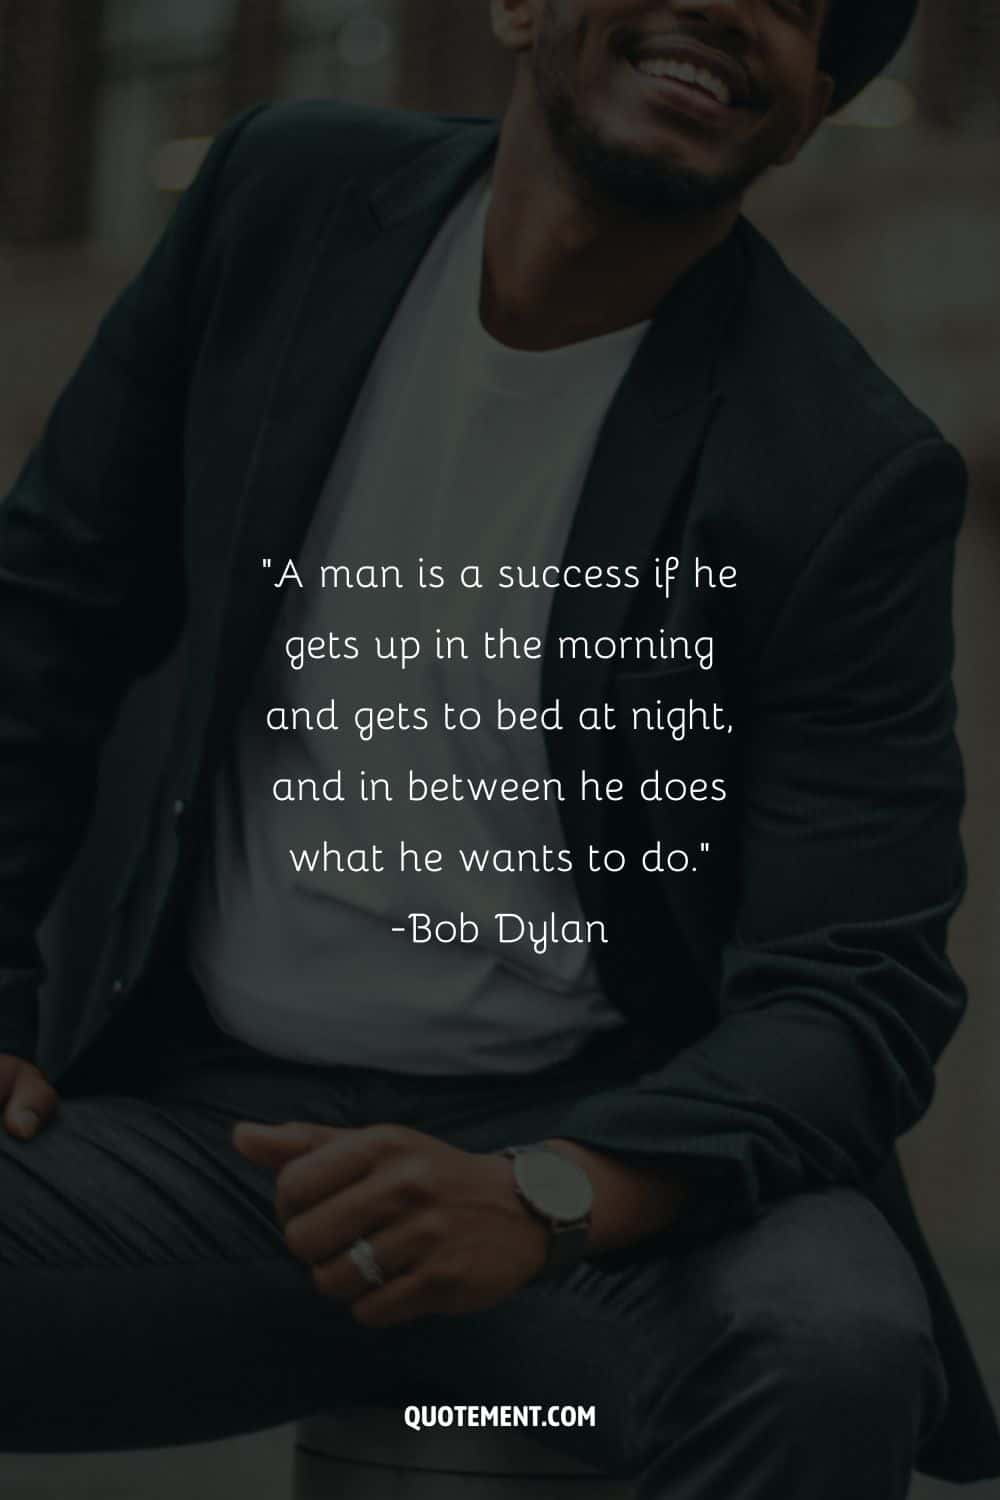 A man is a success if he gets up in the morning and gets to bed at night, and in between he does what he wants to do